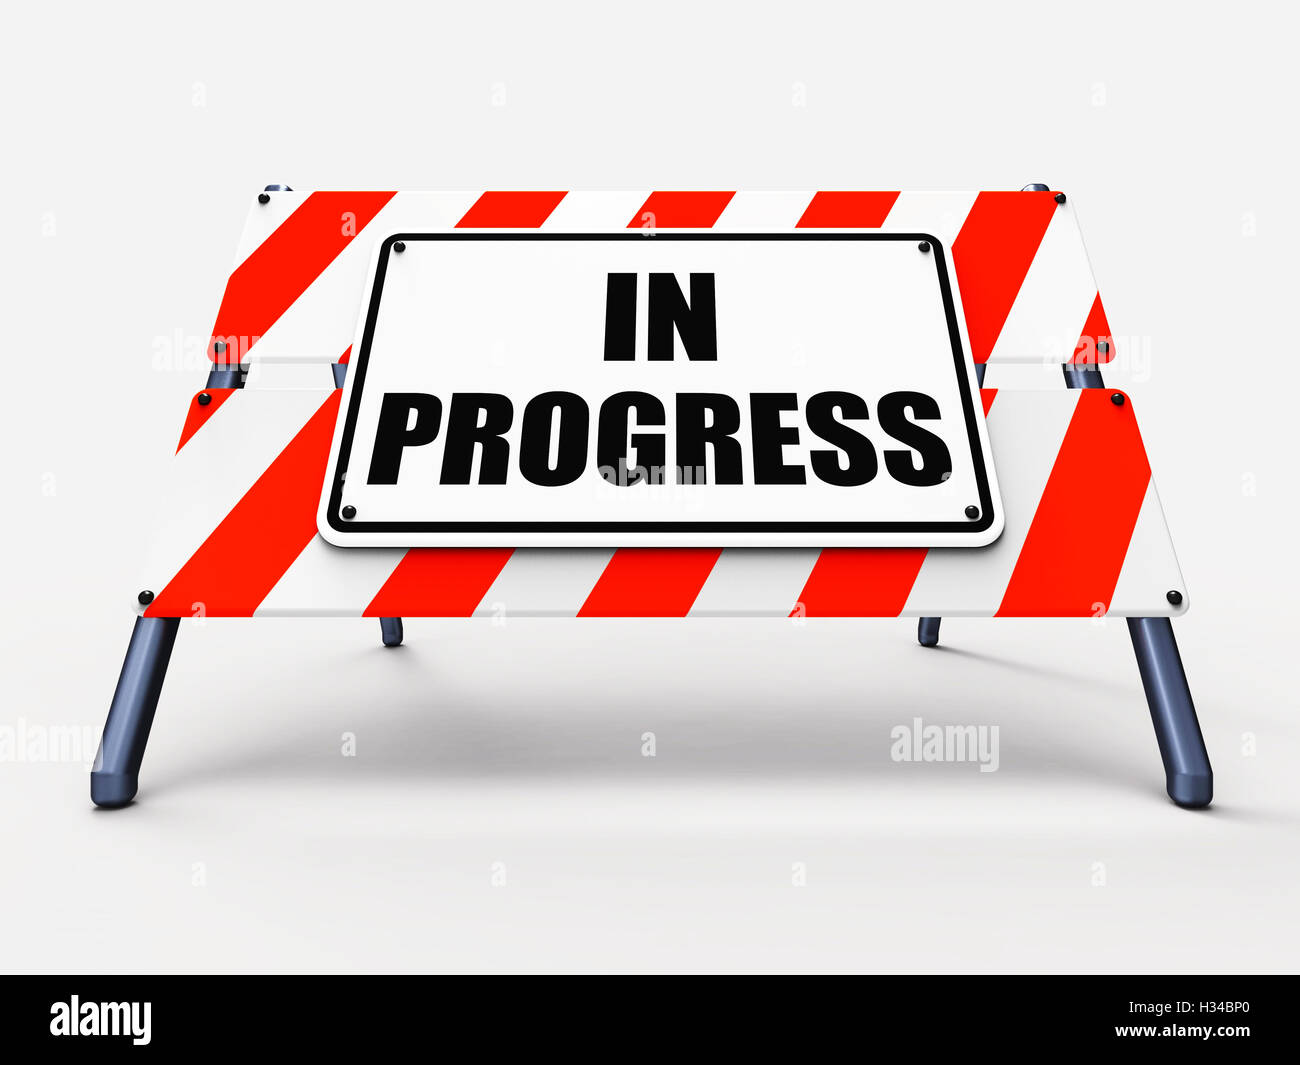 In Progress Sign Indicates Ongoing or Happening Now Stock Photo